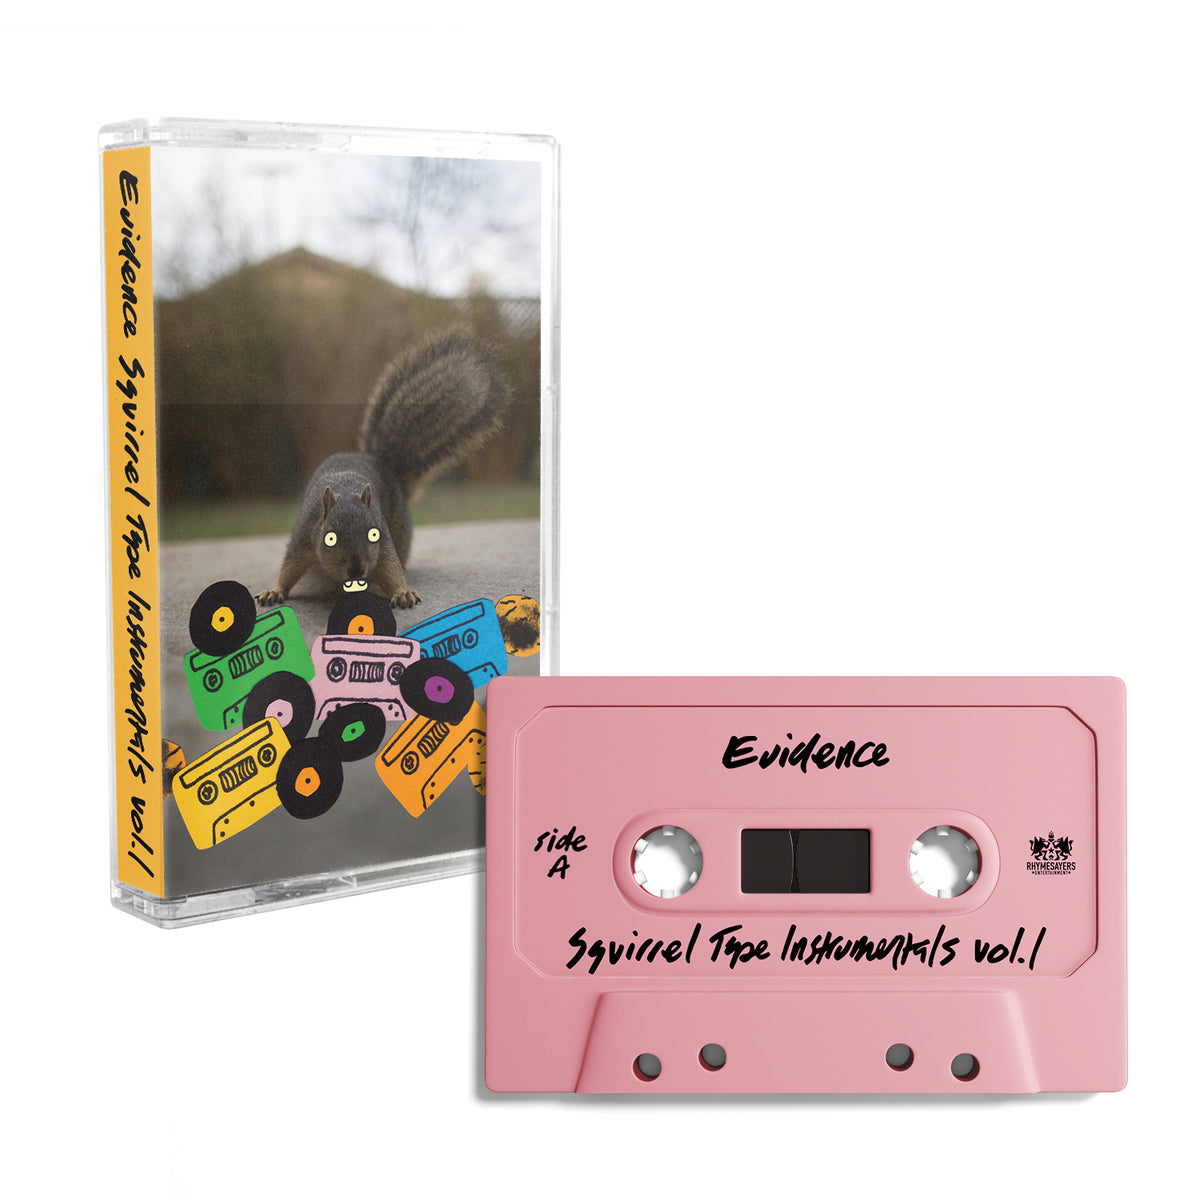 Evidence - Squirrel Tape Instrumentals Vol. 1 - Rhymesayers 